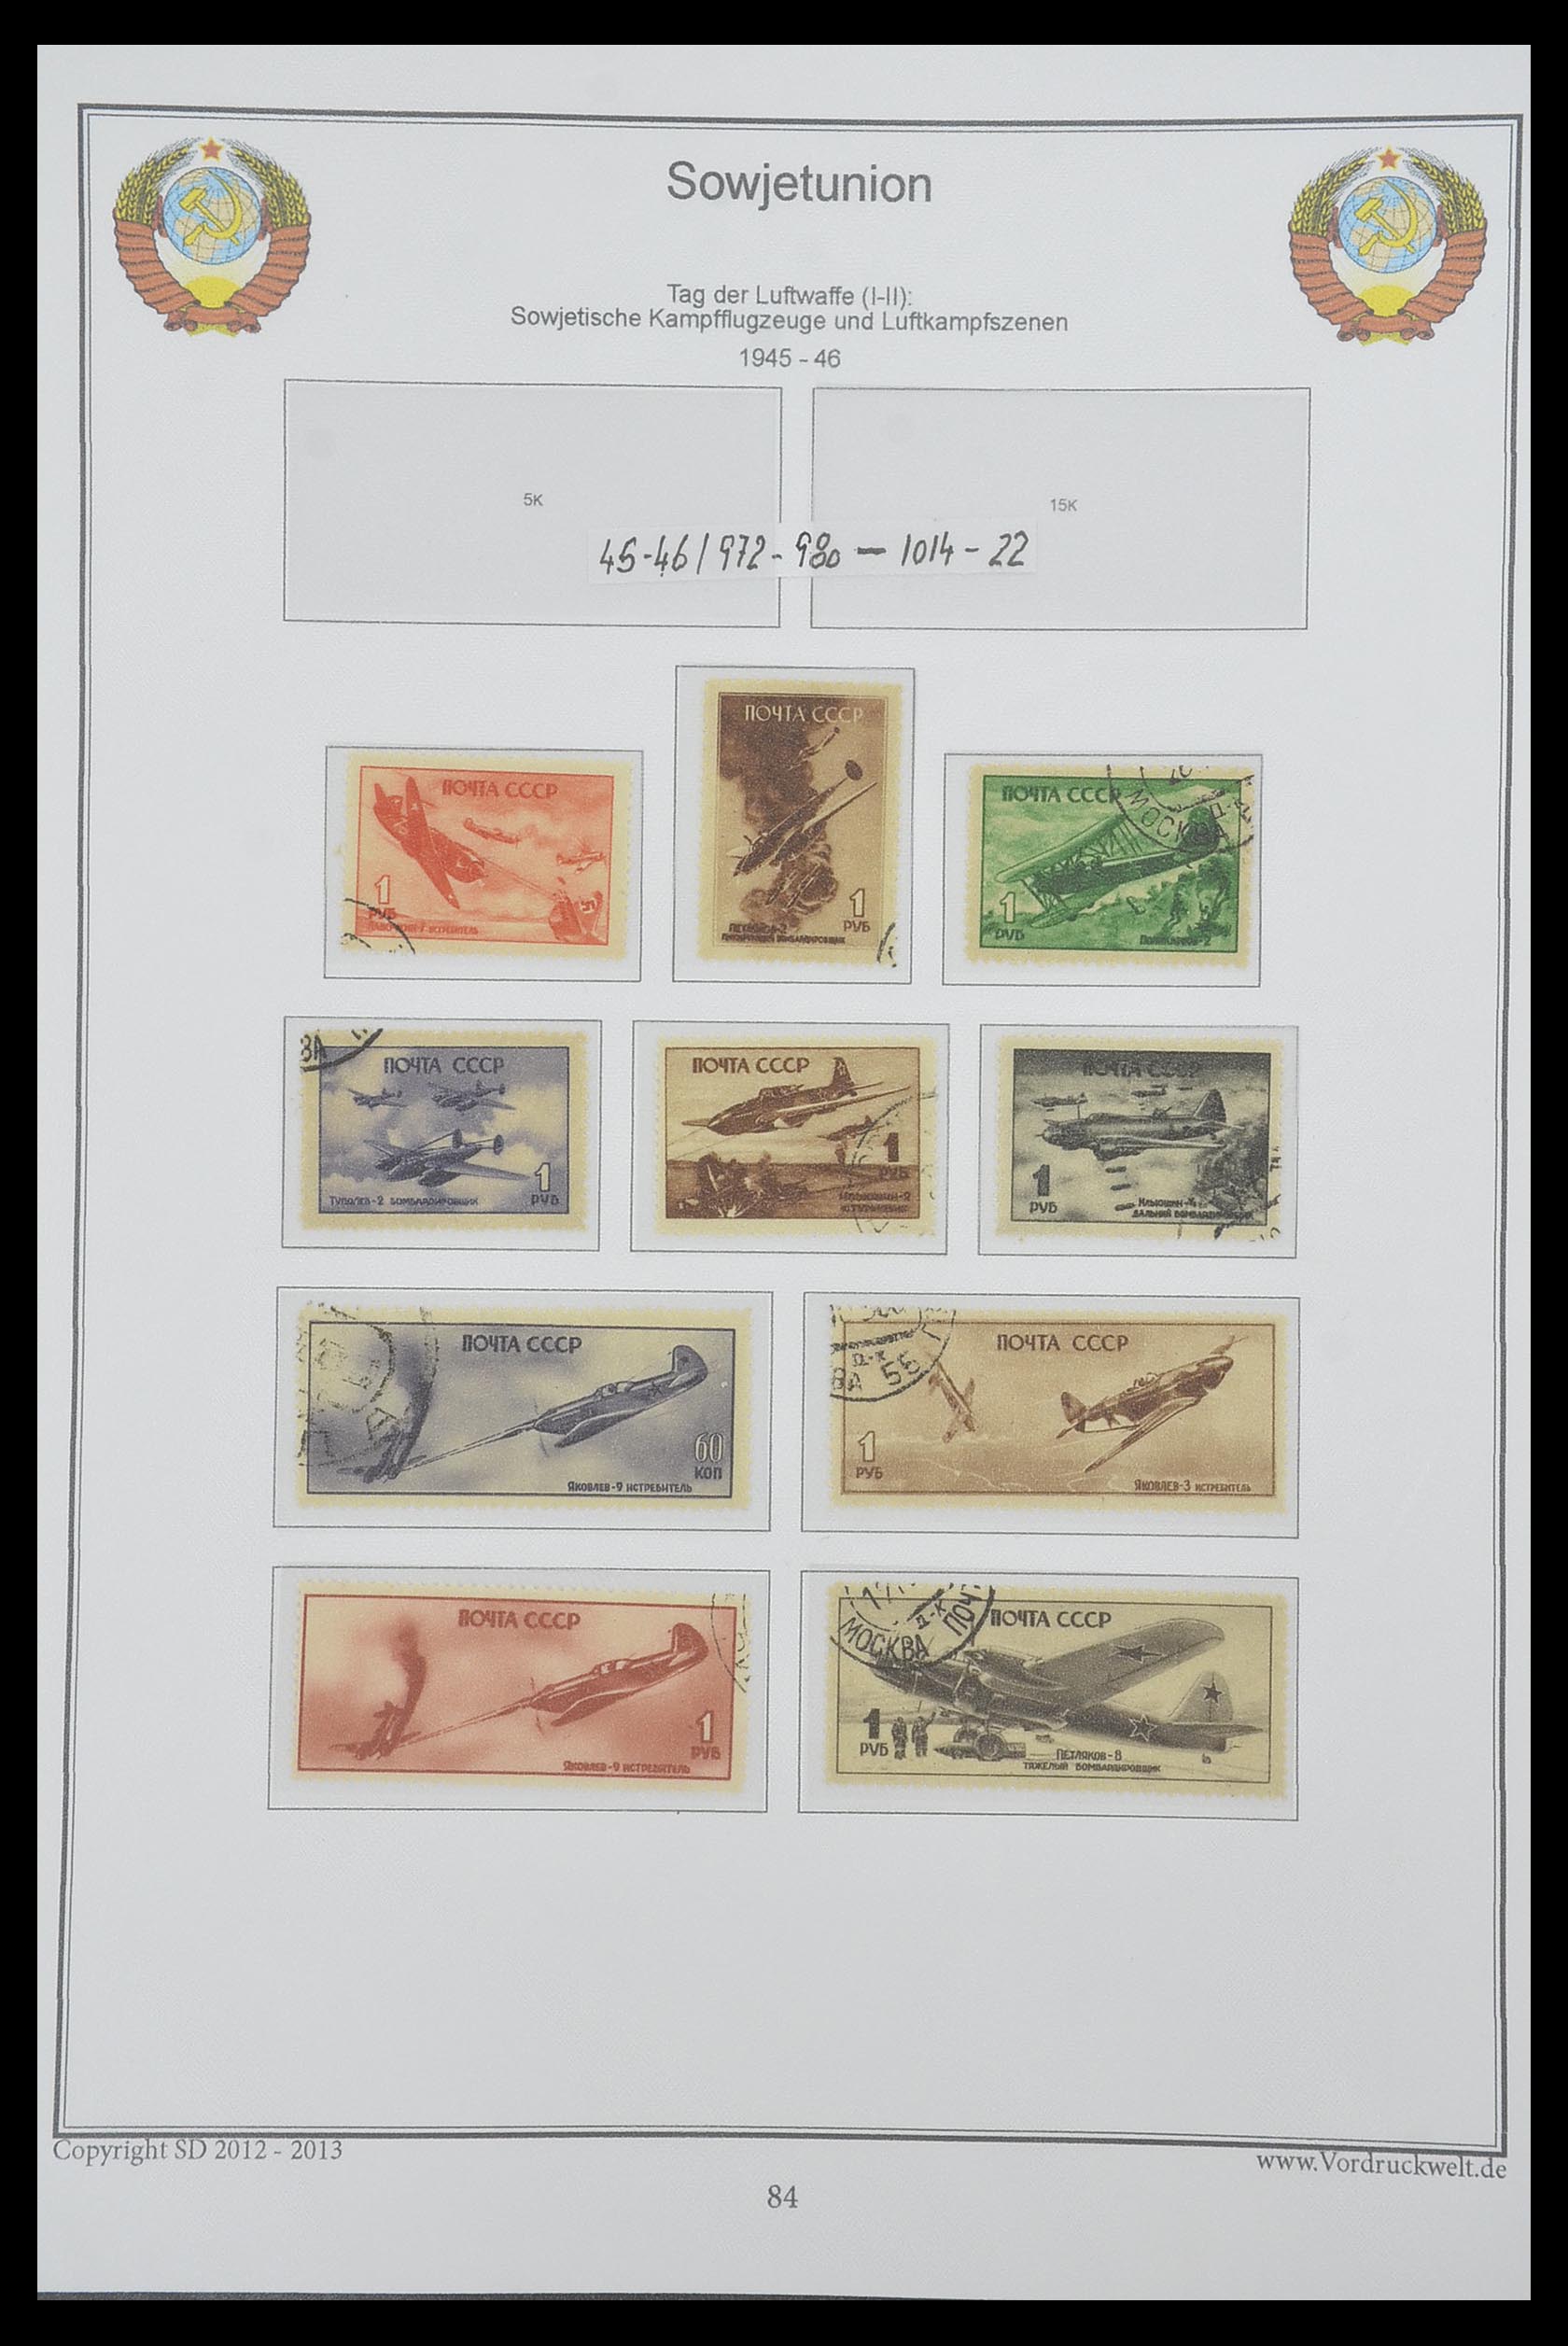 33974 098 - Stamp collection 33974 Russia 1858-1998.